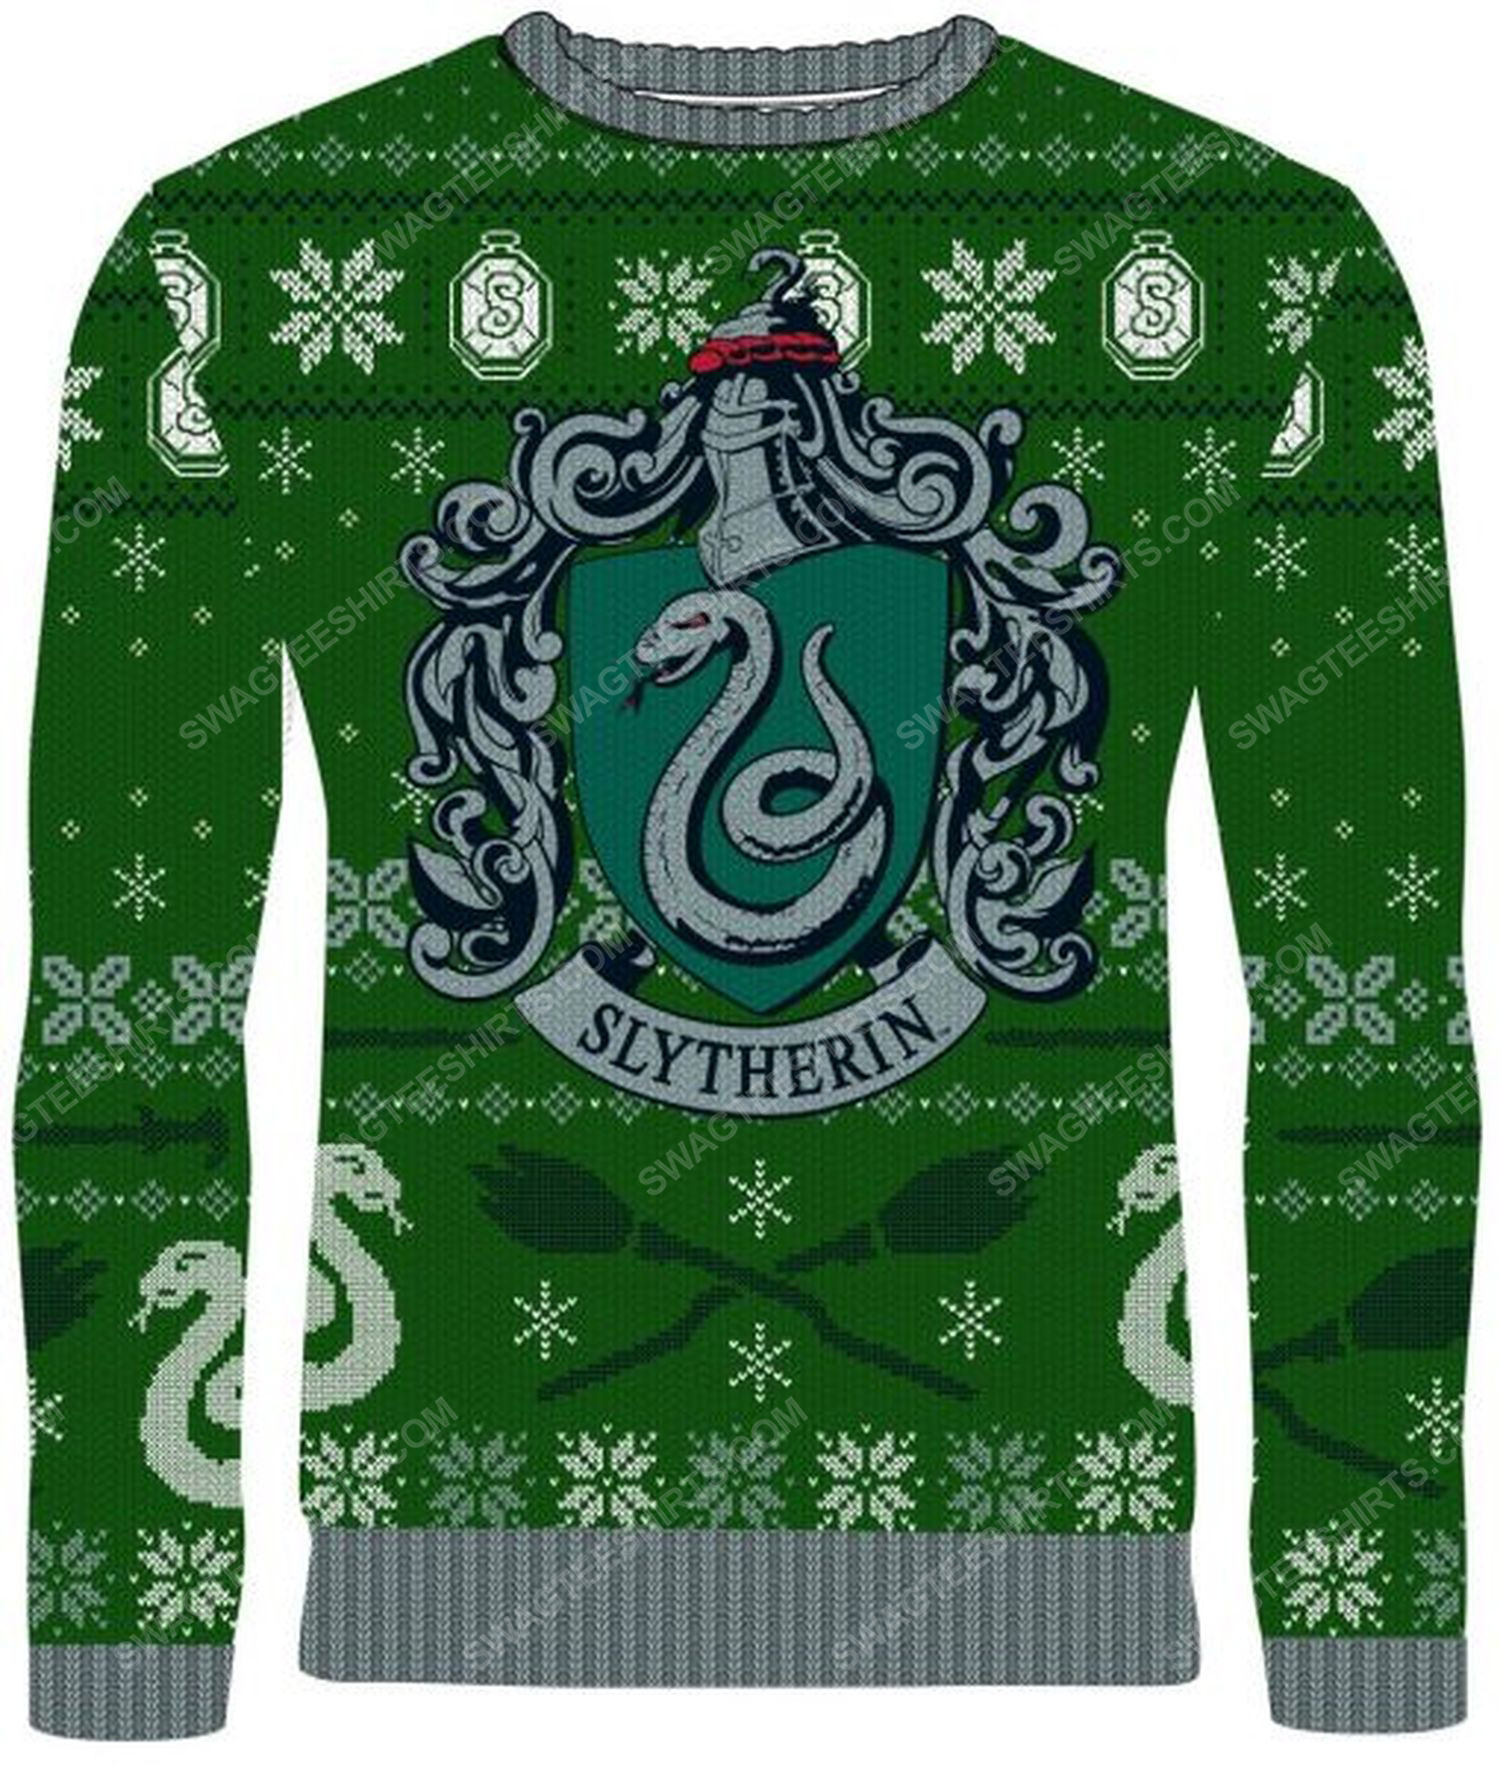 The slytherin harry potter full print ugly christmas sweater 1